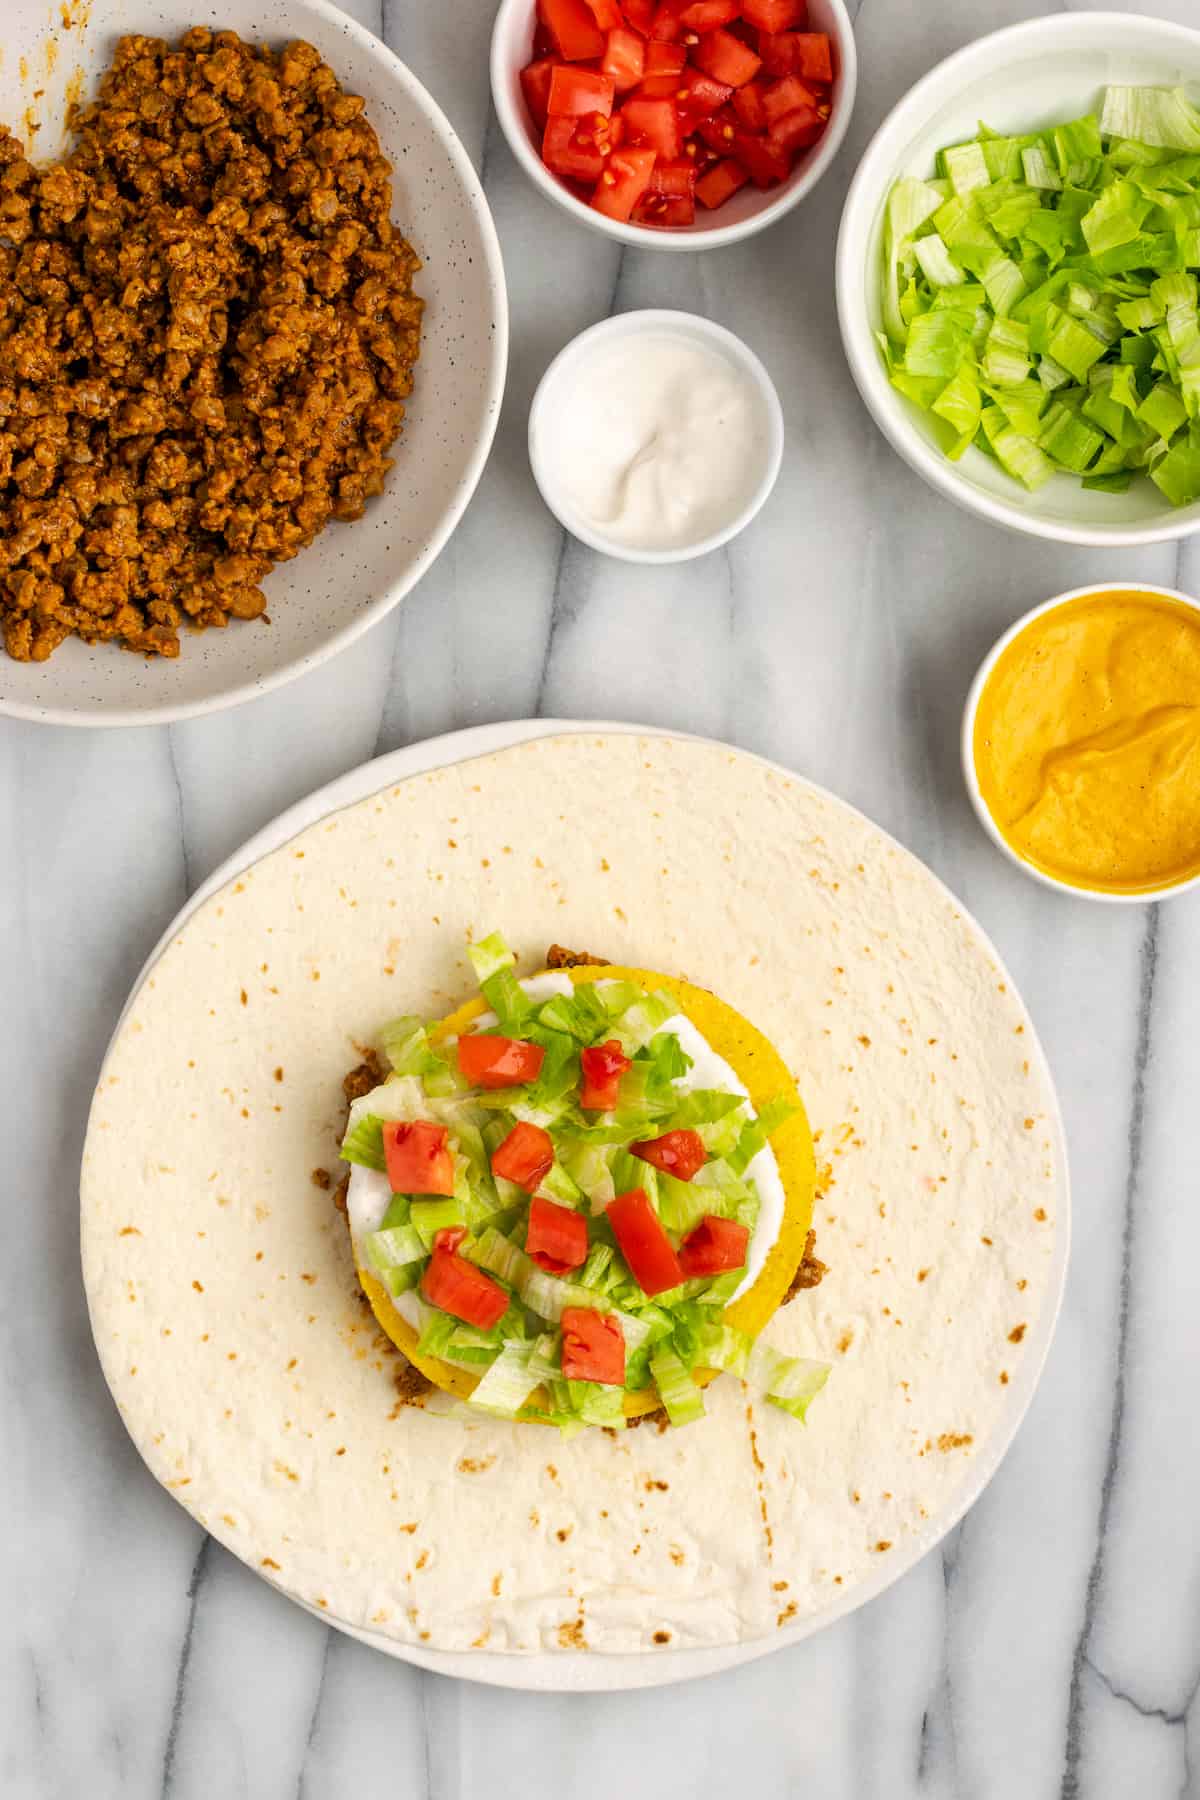 A tortilla topped with vegan meat crumbles, vegan cheese sauce, a tostada, vegan sour cream, lettuce, and tomatoes, next to bowls of meat crumbles, cheese sauce, sour cream, lettuce, and tomatoes